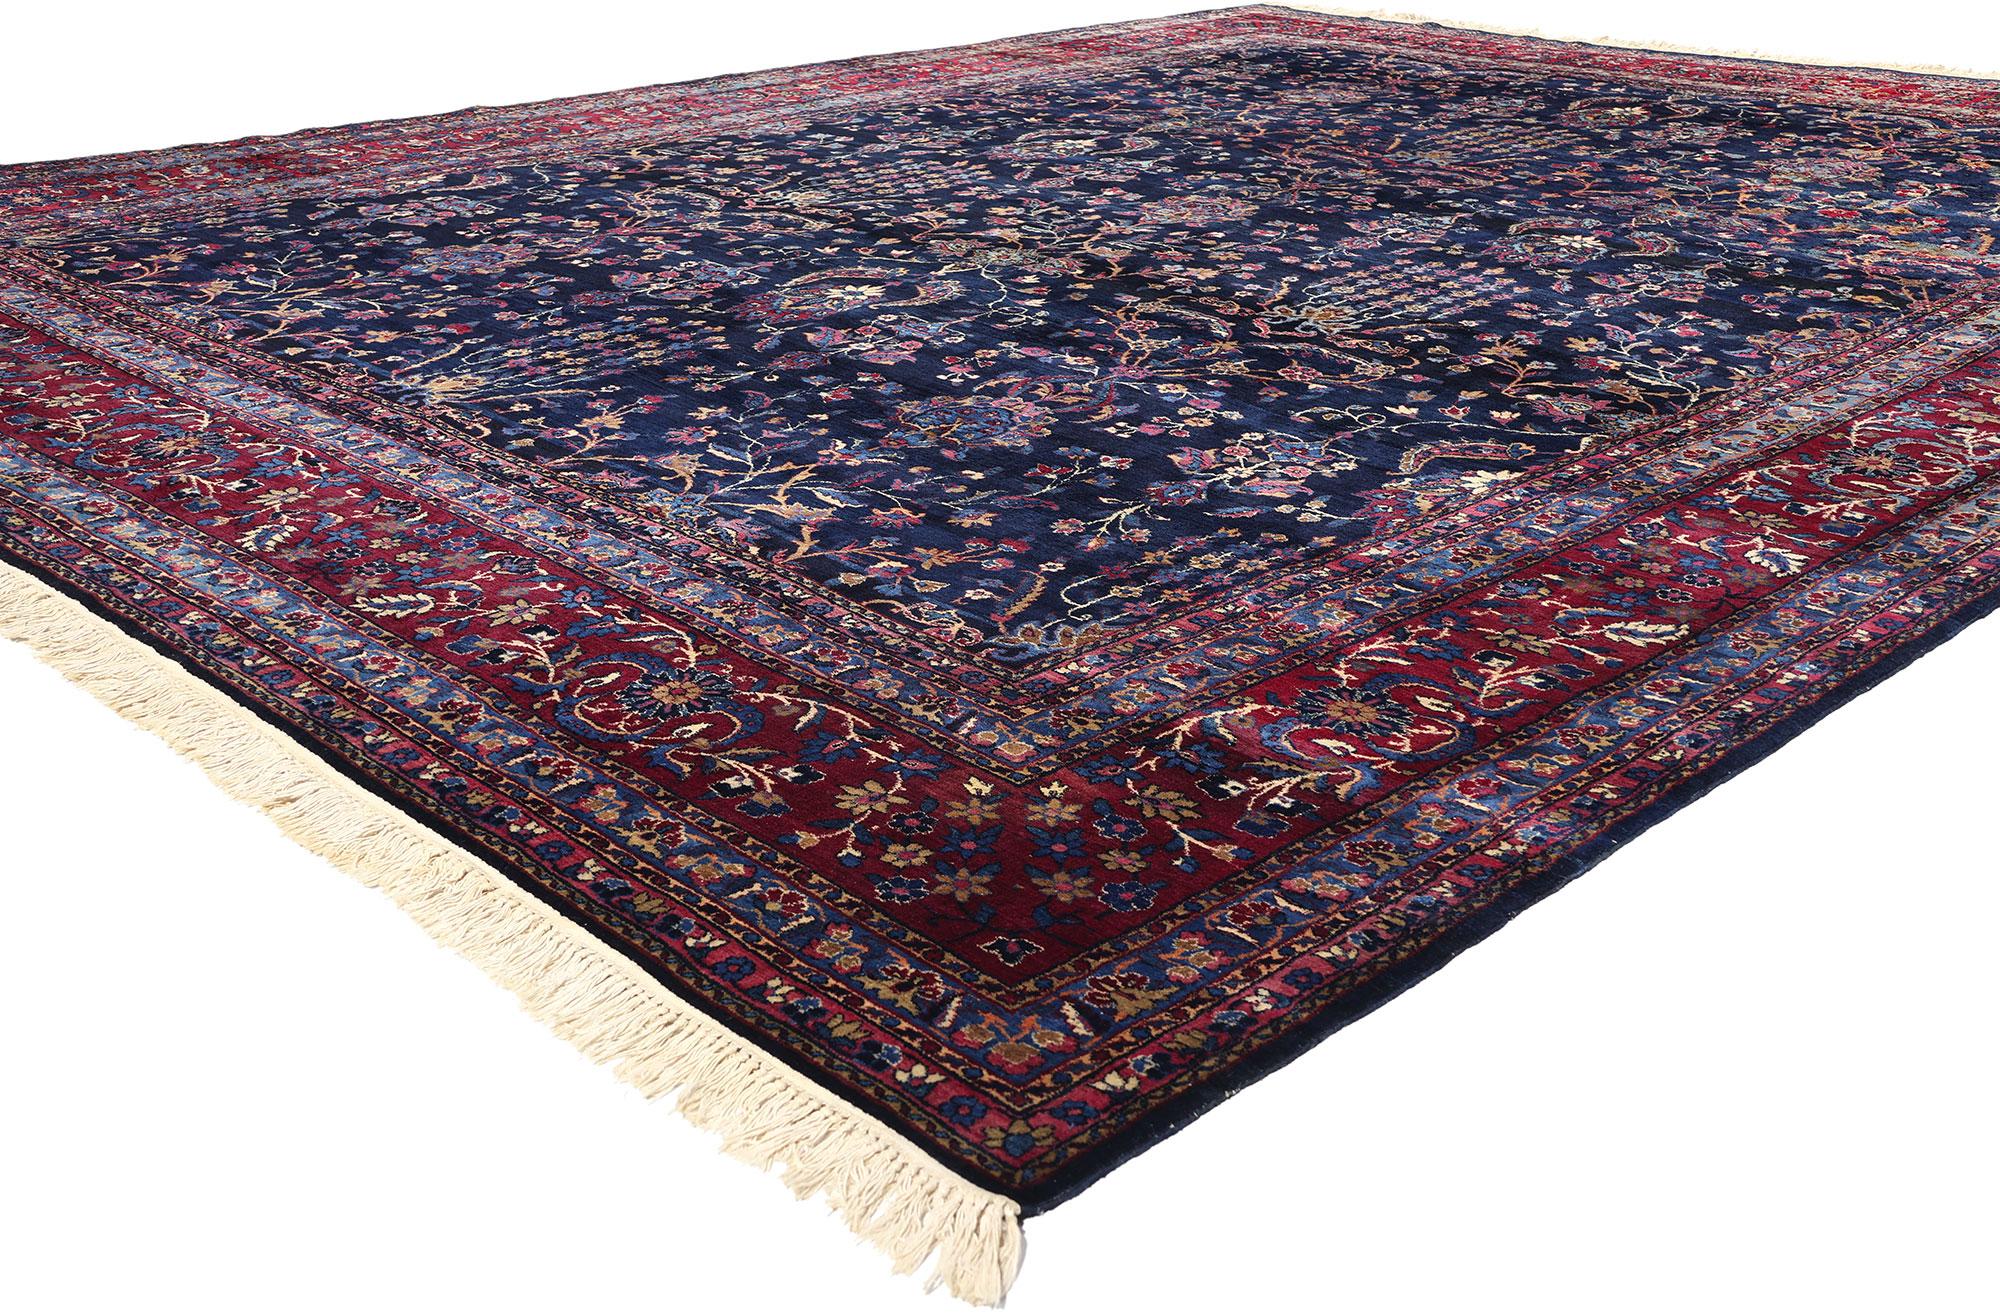 78760 Vintage Navy Blue Persian Kerman Rug, 11'09 x 15'05. Nestled in the heart of south-central Iran lies the origin of Kerman rugs, within the venerable city of Kerman itself. Renowned for centuries as a hub of weaving excellence, this bustling